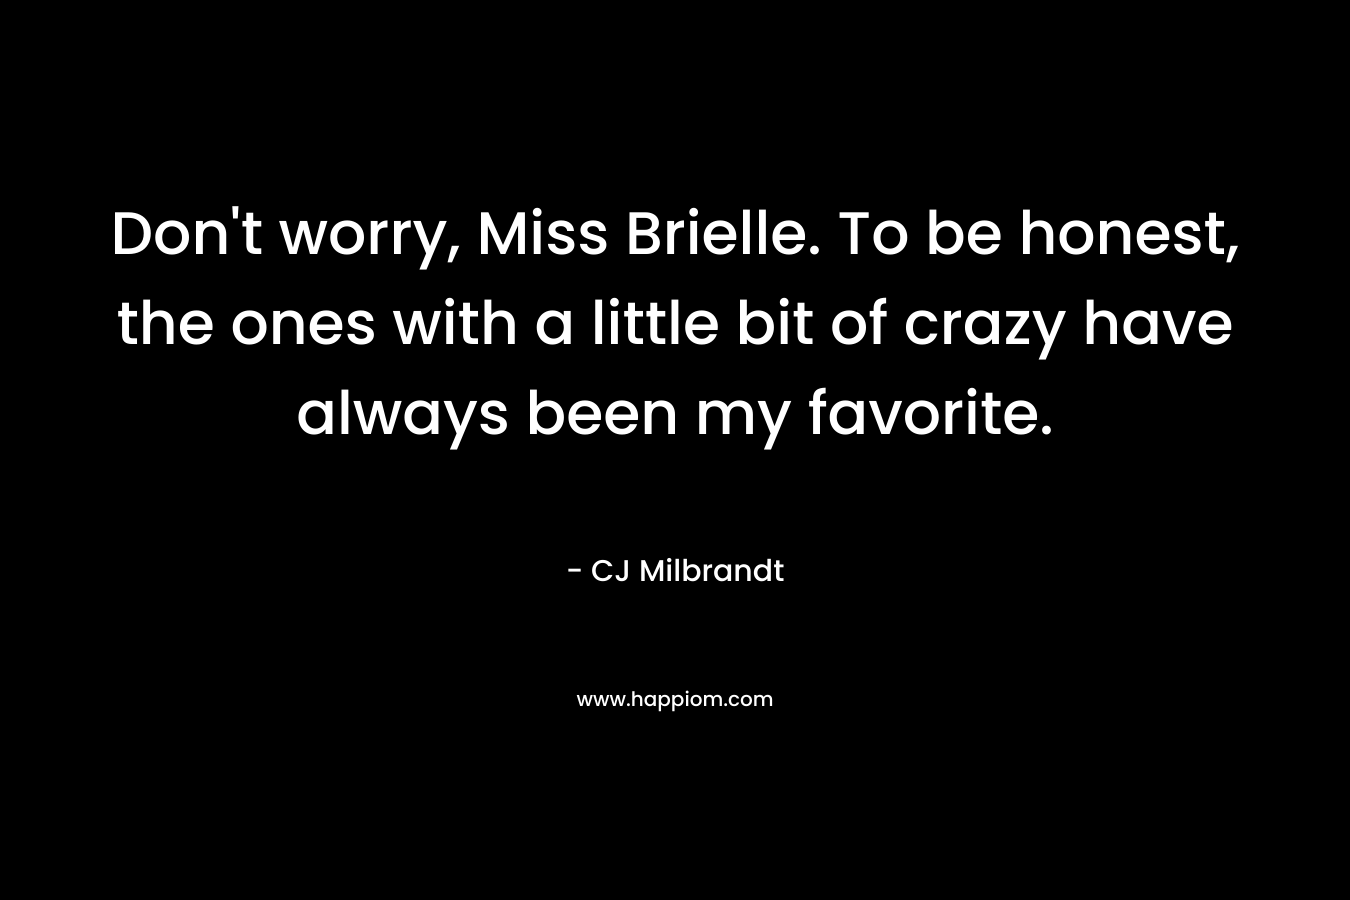 Don’t worry, Miss Brielle. To be honest, the ones with a little bit of crazy have always been my favorite. – CJ Milbrandt